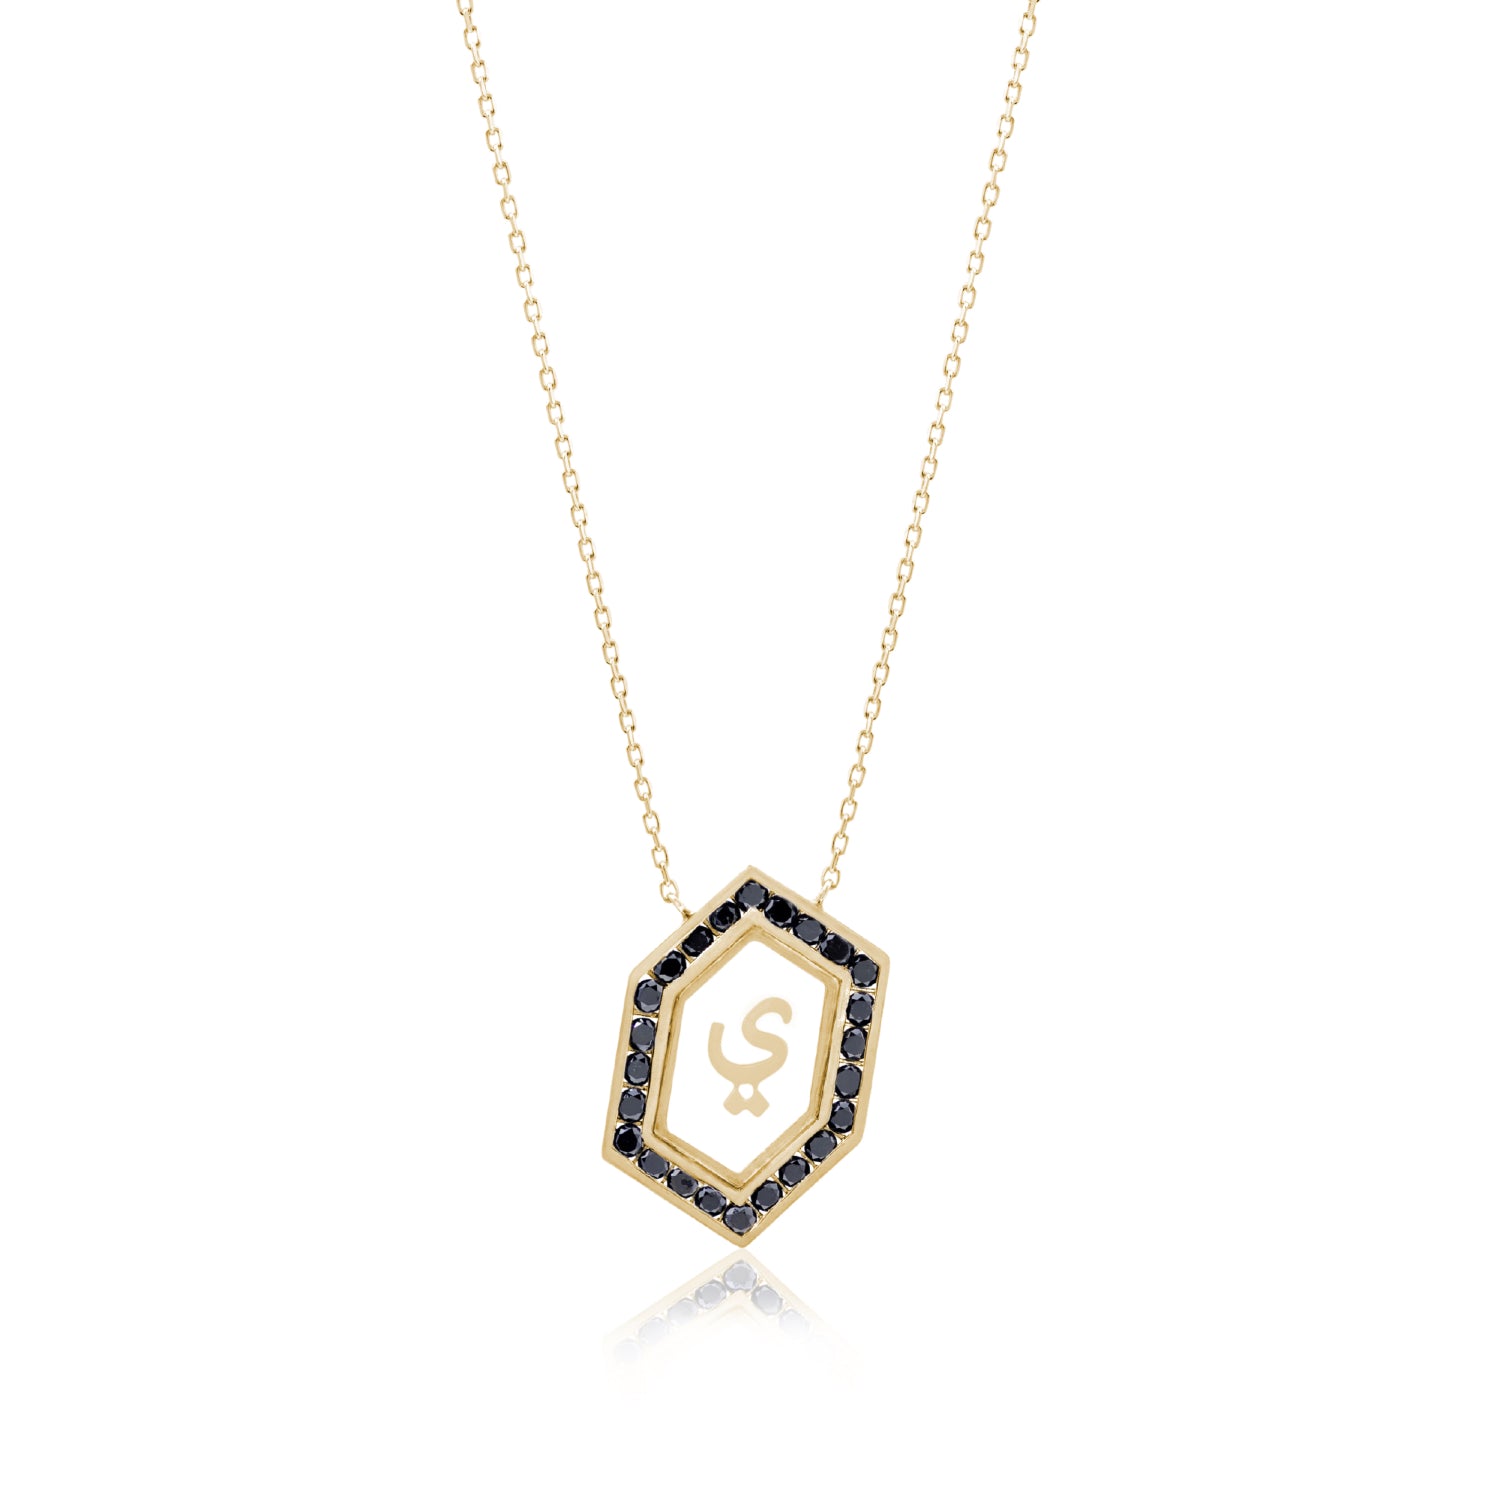 Qamoos 1.0 Letter ي Black Diamond Necklace in Yellow Gold